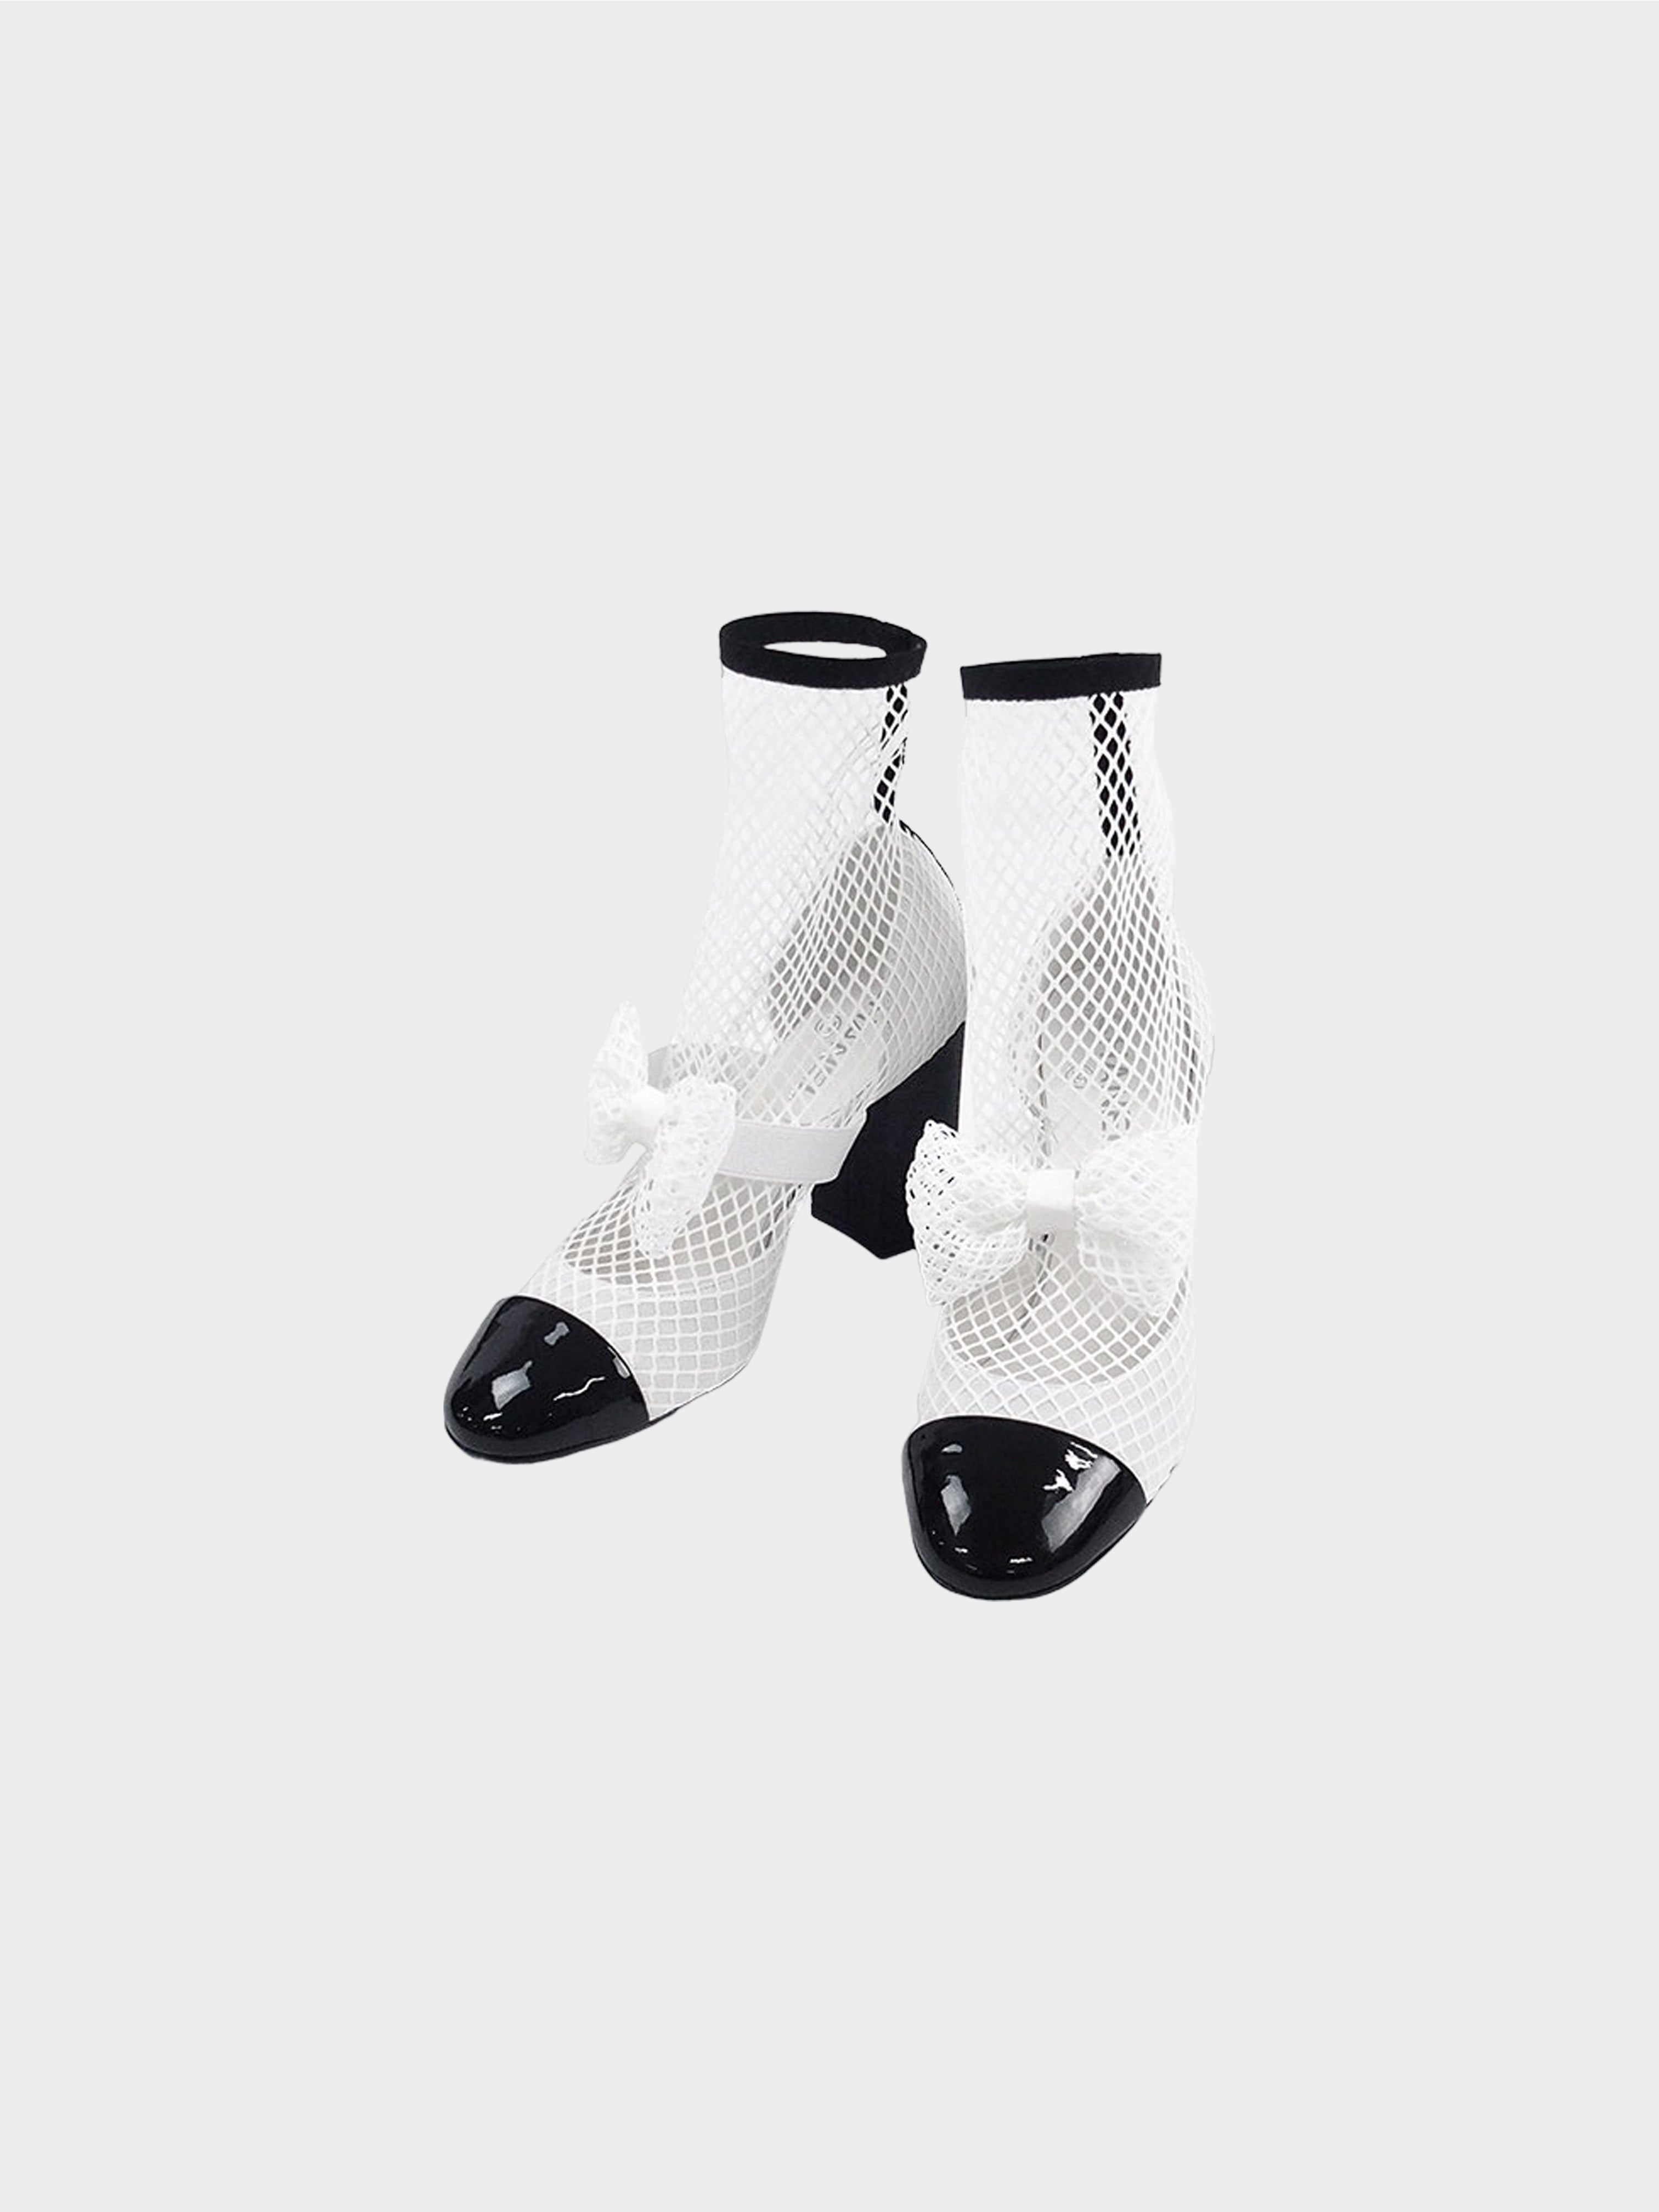 Chanel Spring 2023 Color Block Fishnet Mary Jane Ankle Boots with Bow